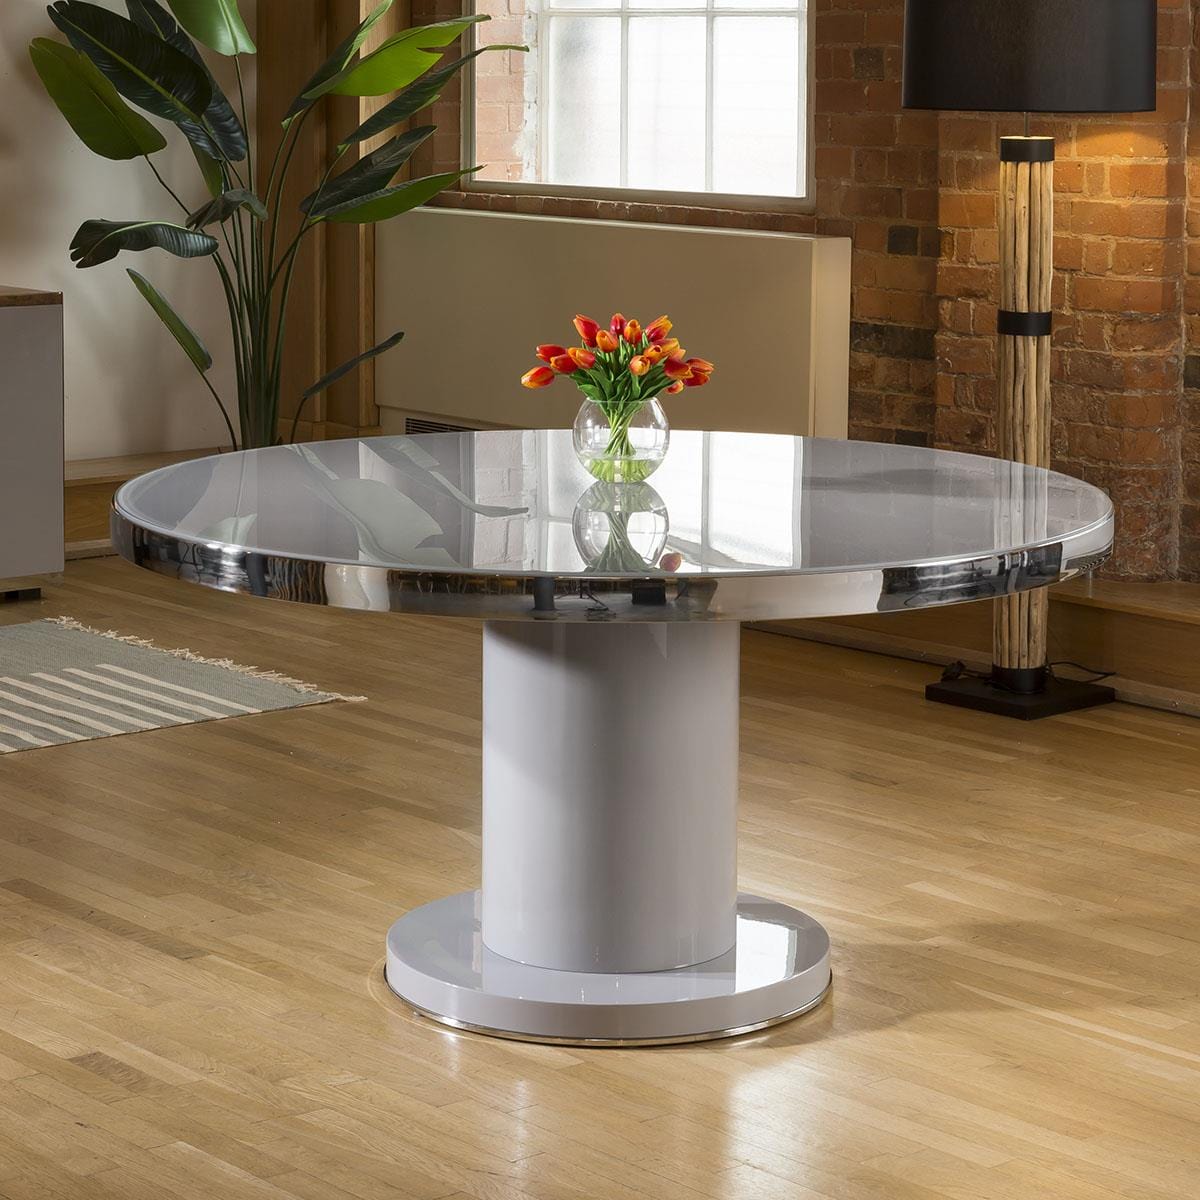 Quatropi Round 1500mm Dining Table Grey Gloss Base Glass Top & Polished Steel